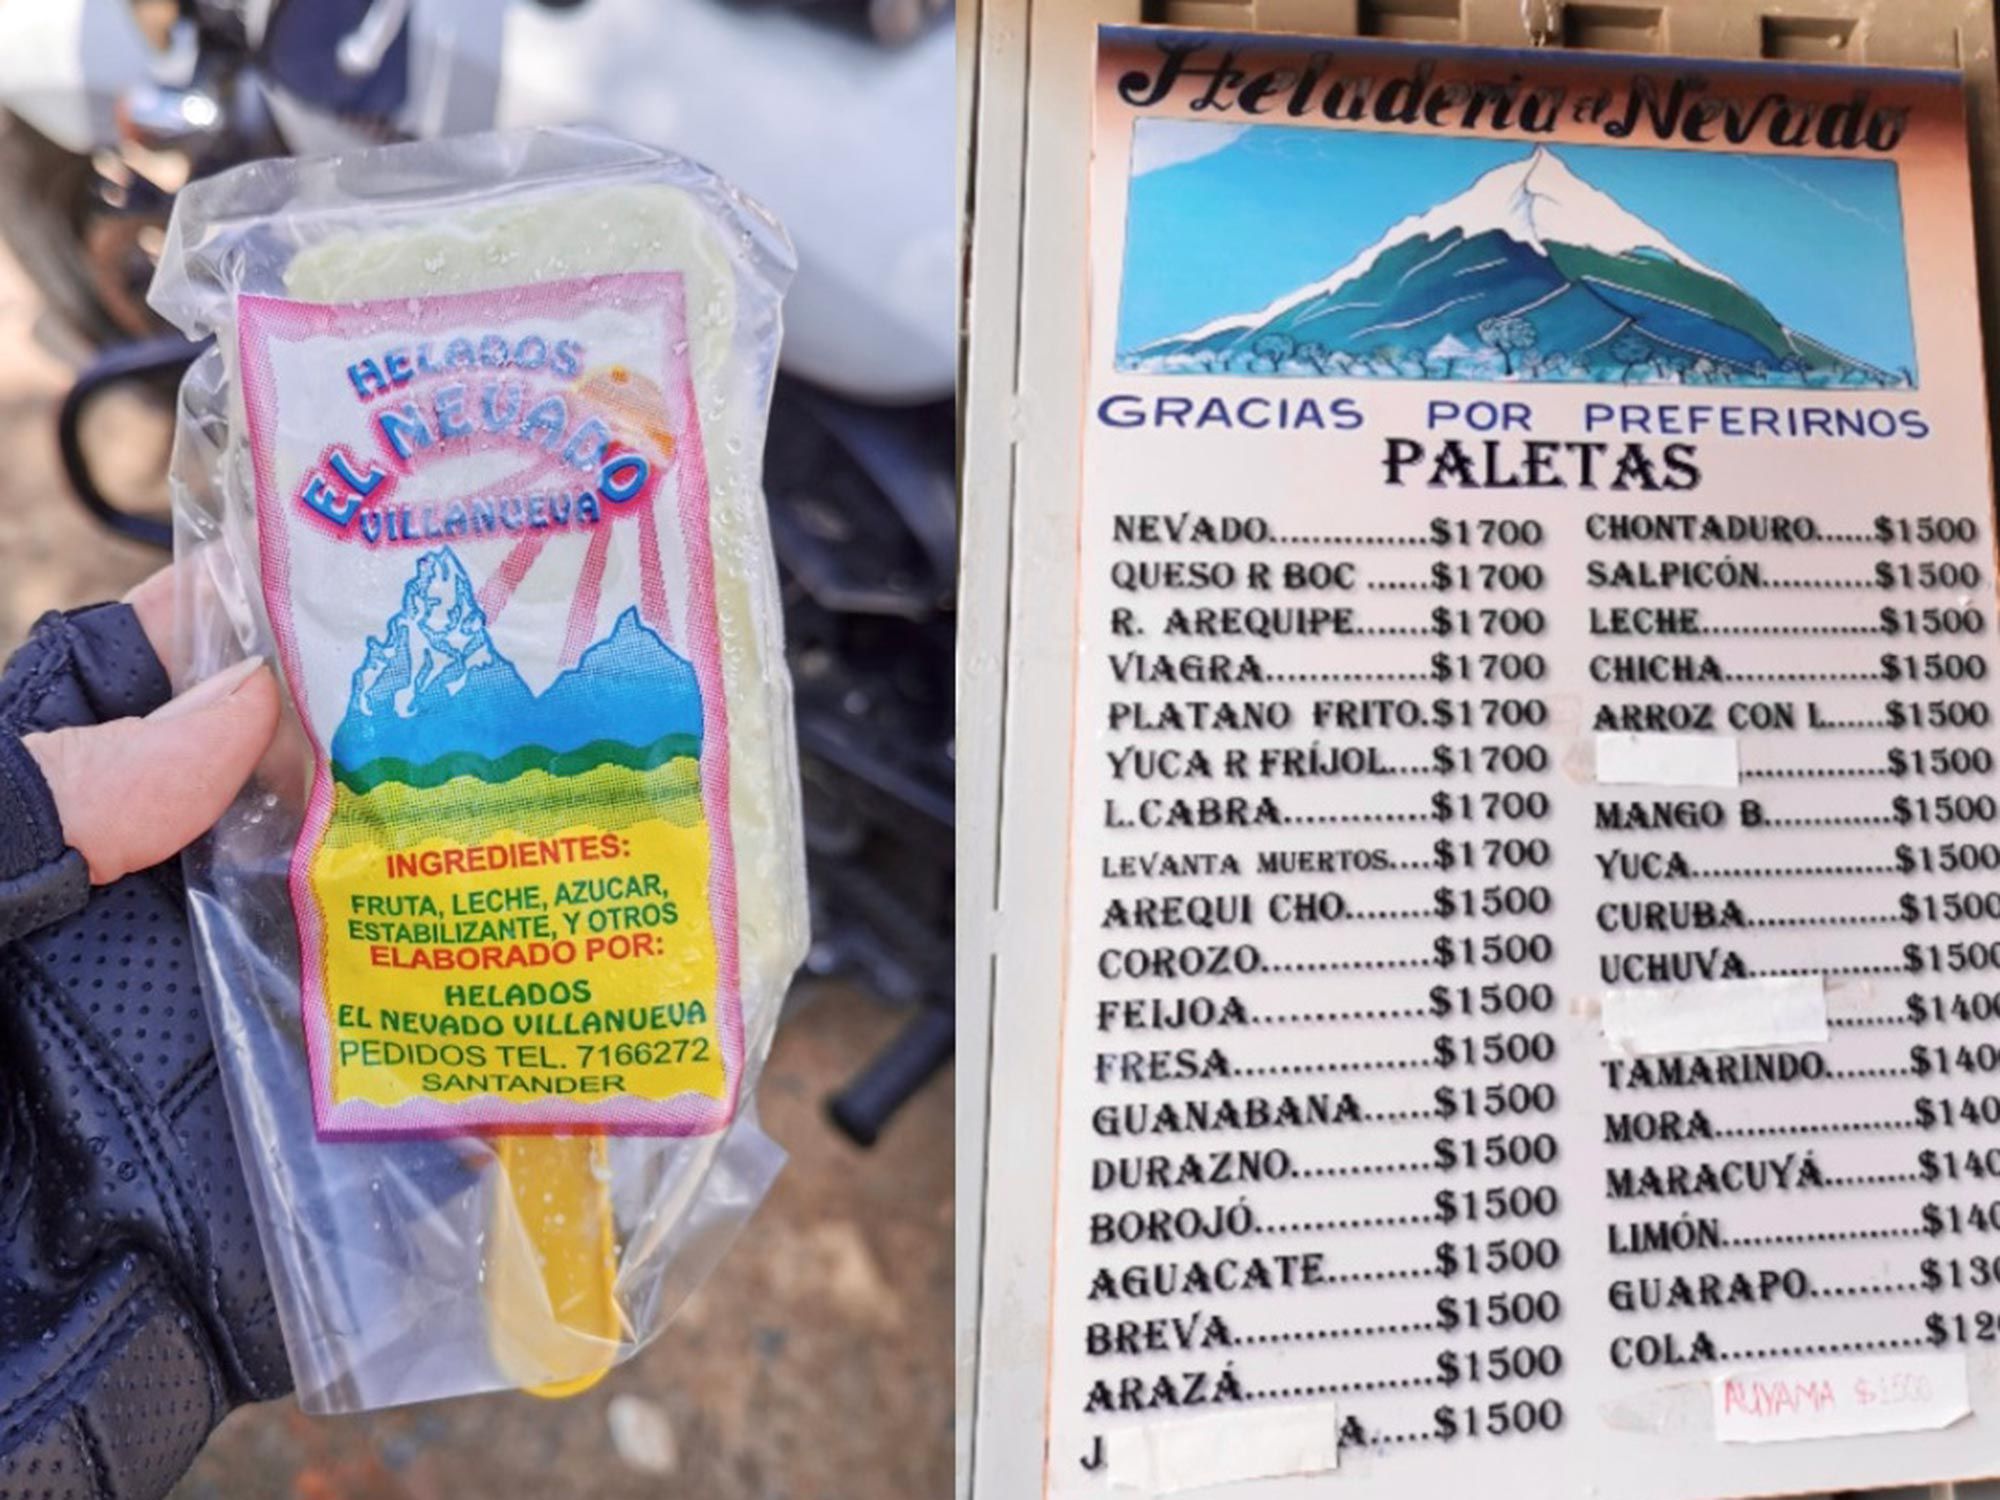 The famed Helados El Nevado of Villanueva. I did not elect to try the Viagra or Levanta Muertos (dead-raiser) flavors. Prices are in Colombian Pesos, so at time of writing, the most expensive ones are less than 50 cents USD.